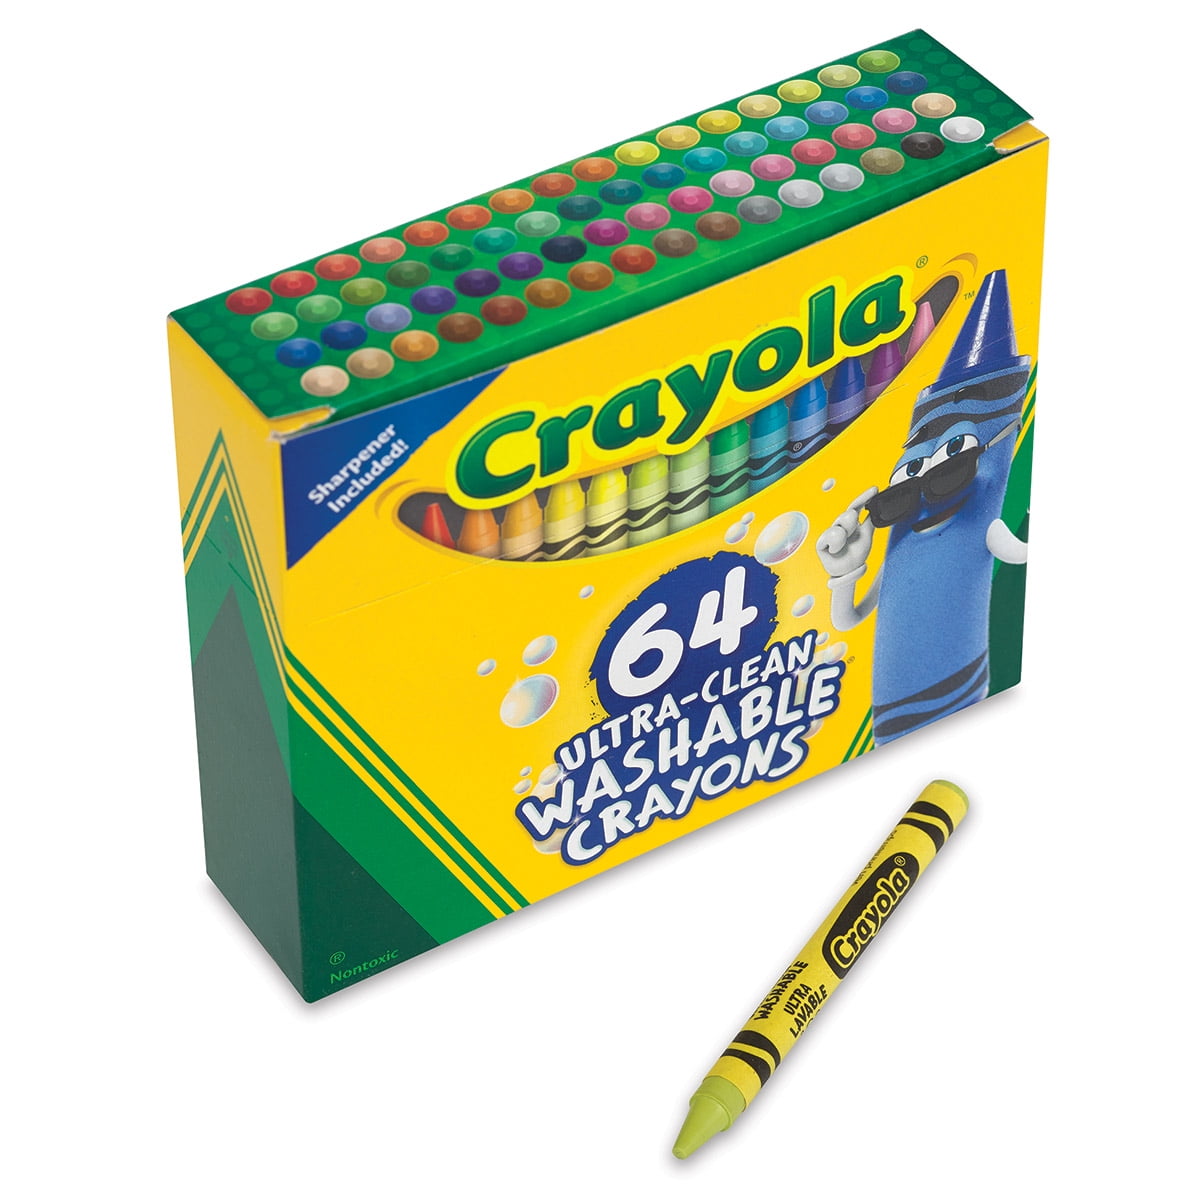 Crayola 64ct Classic Crayons With Sharpener : Target